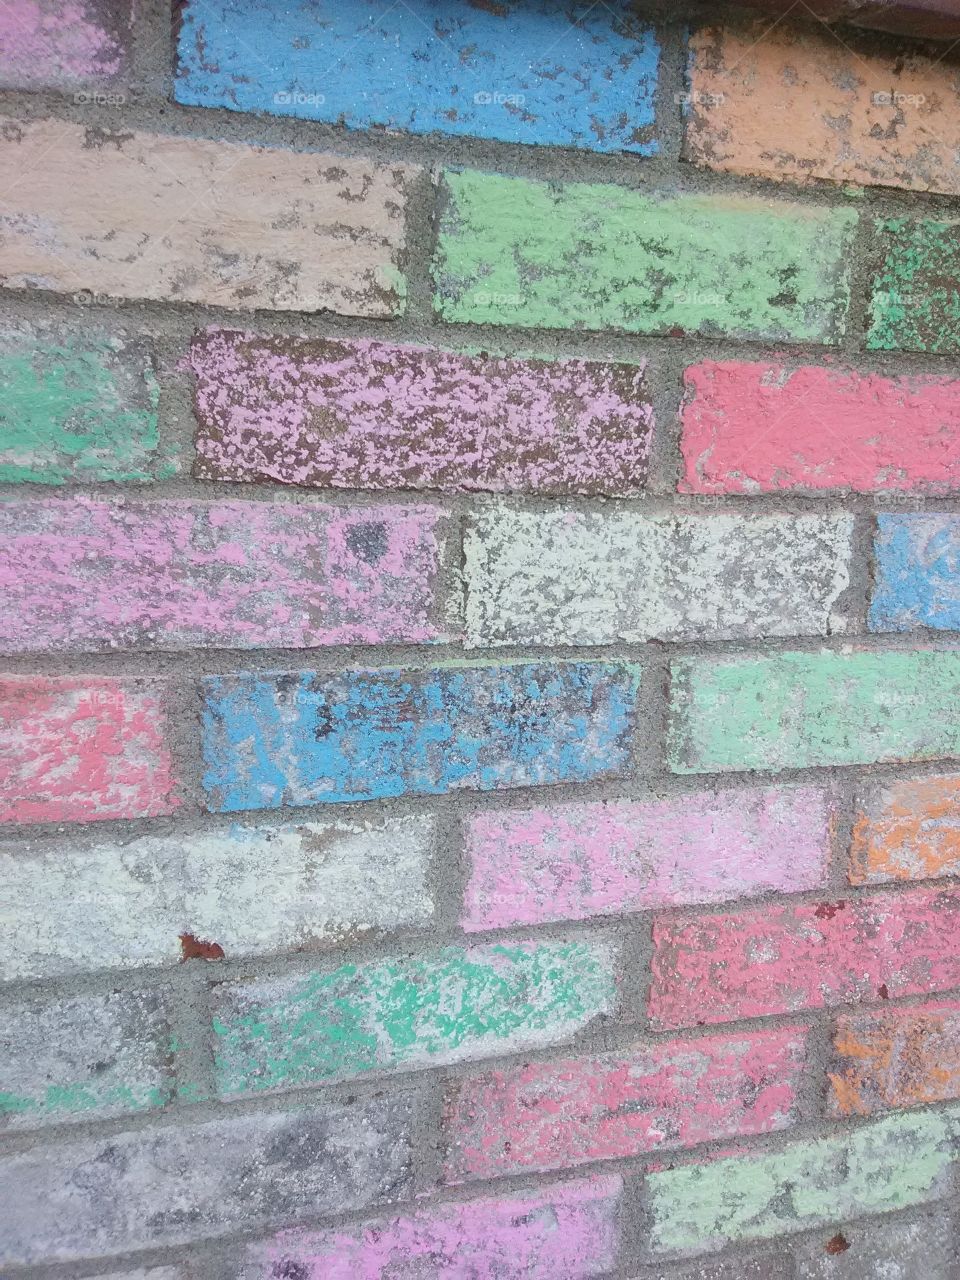 colorful color chalked brick really brighens a place up.